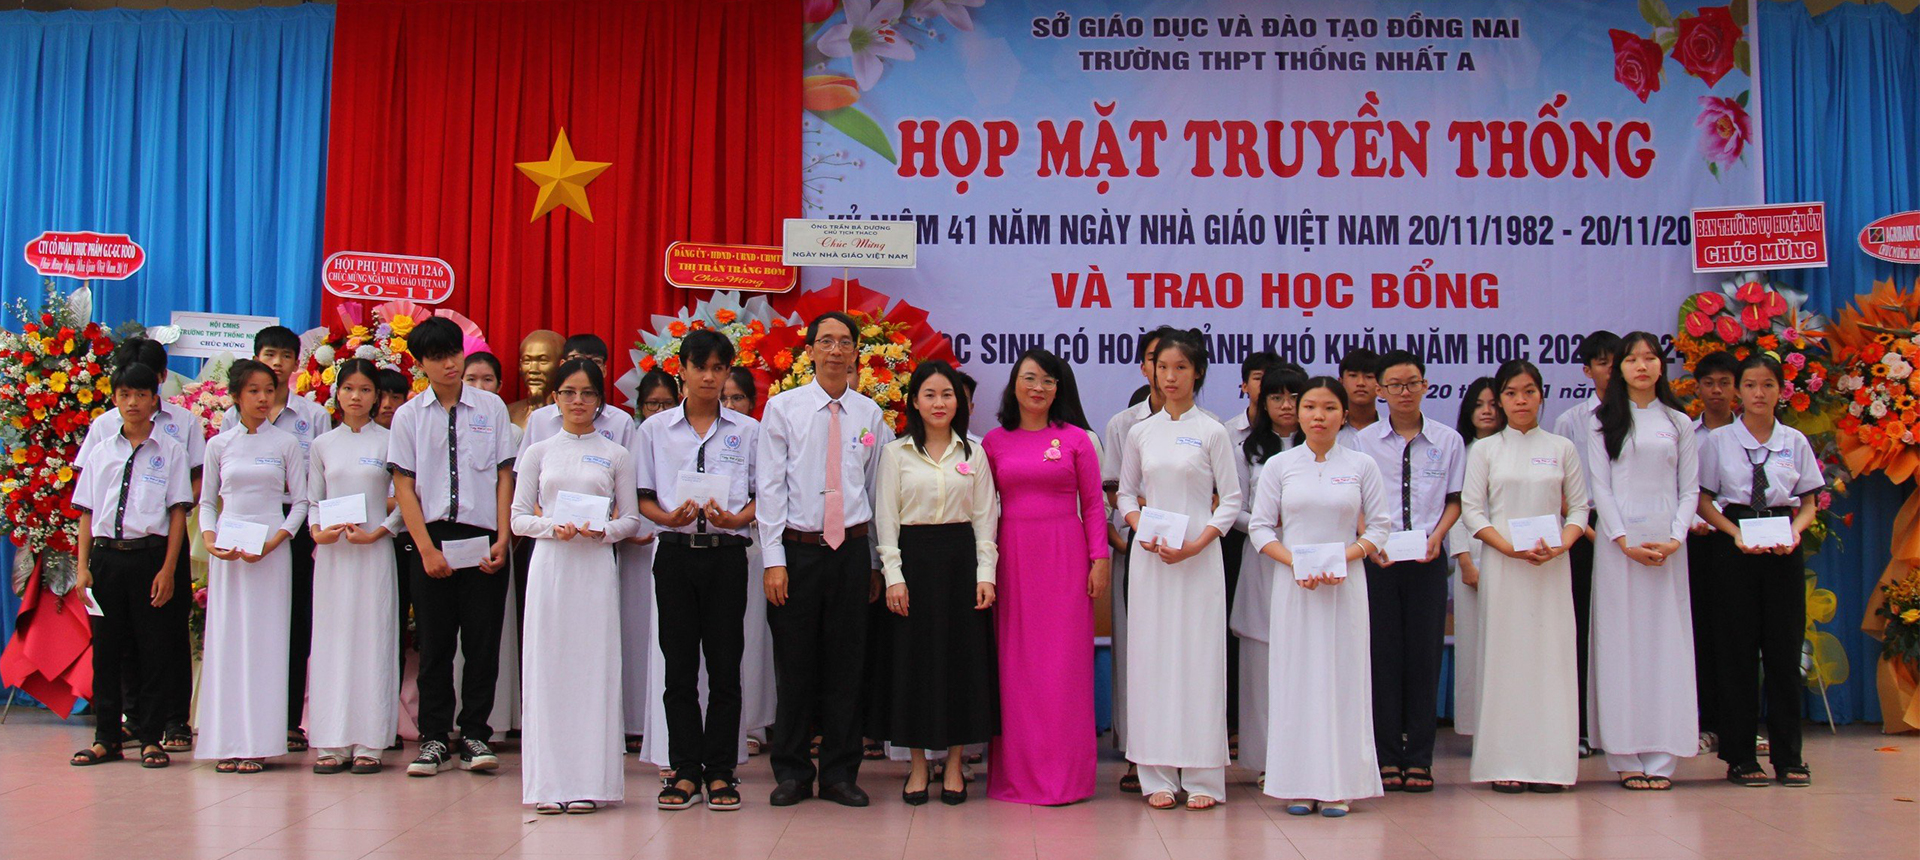 THACO grants 20 scholarships to disadvantaged students in Dong Nai province